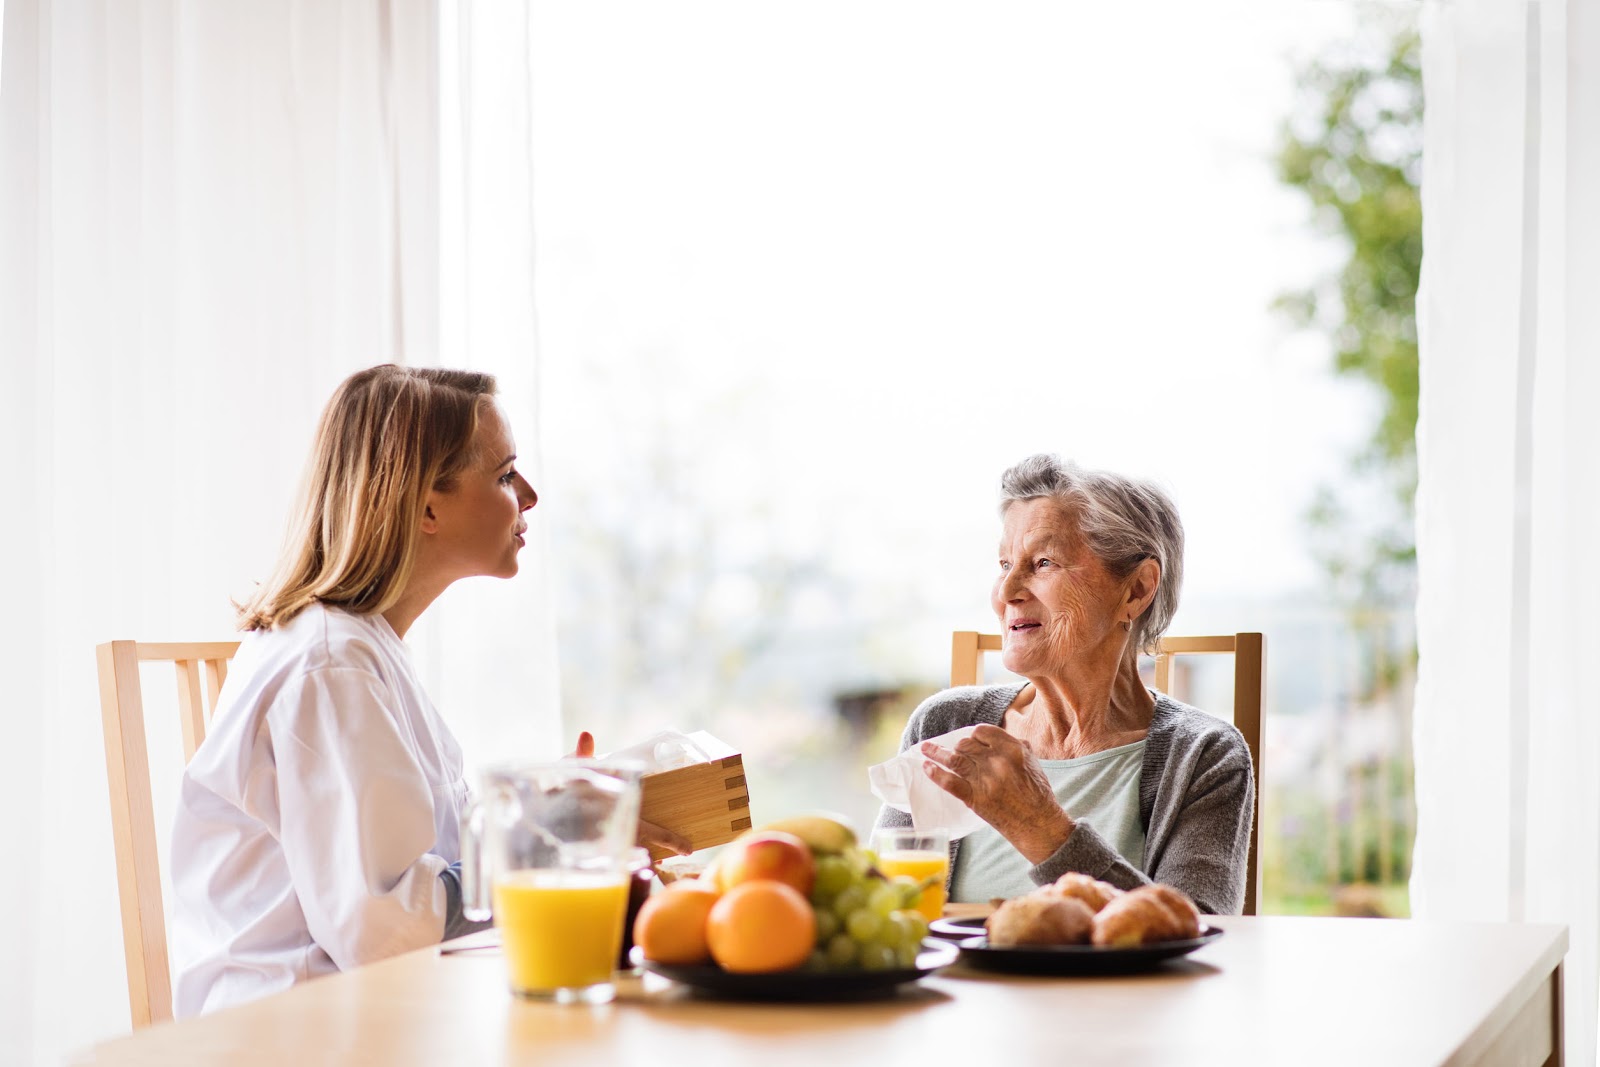 Health visitor and a senior woman during home visit. A nurse and an elderly woman sitting at the table, talking together.